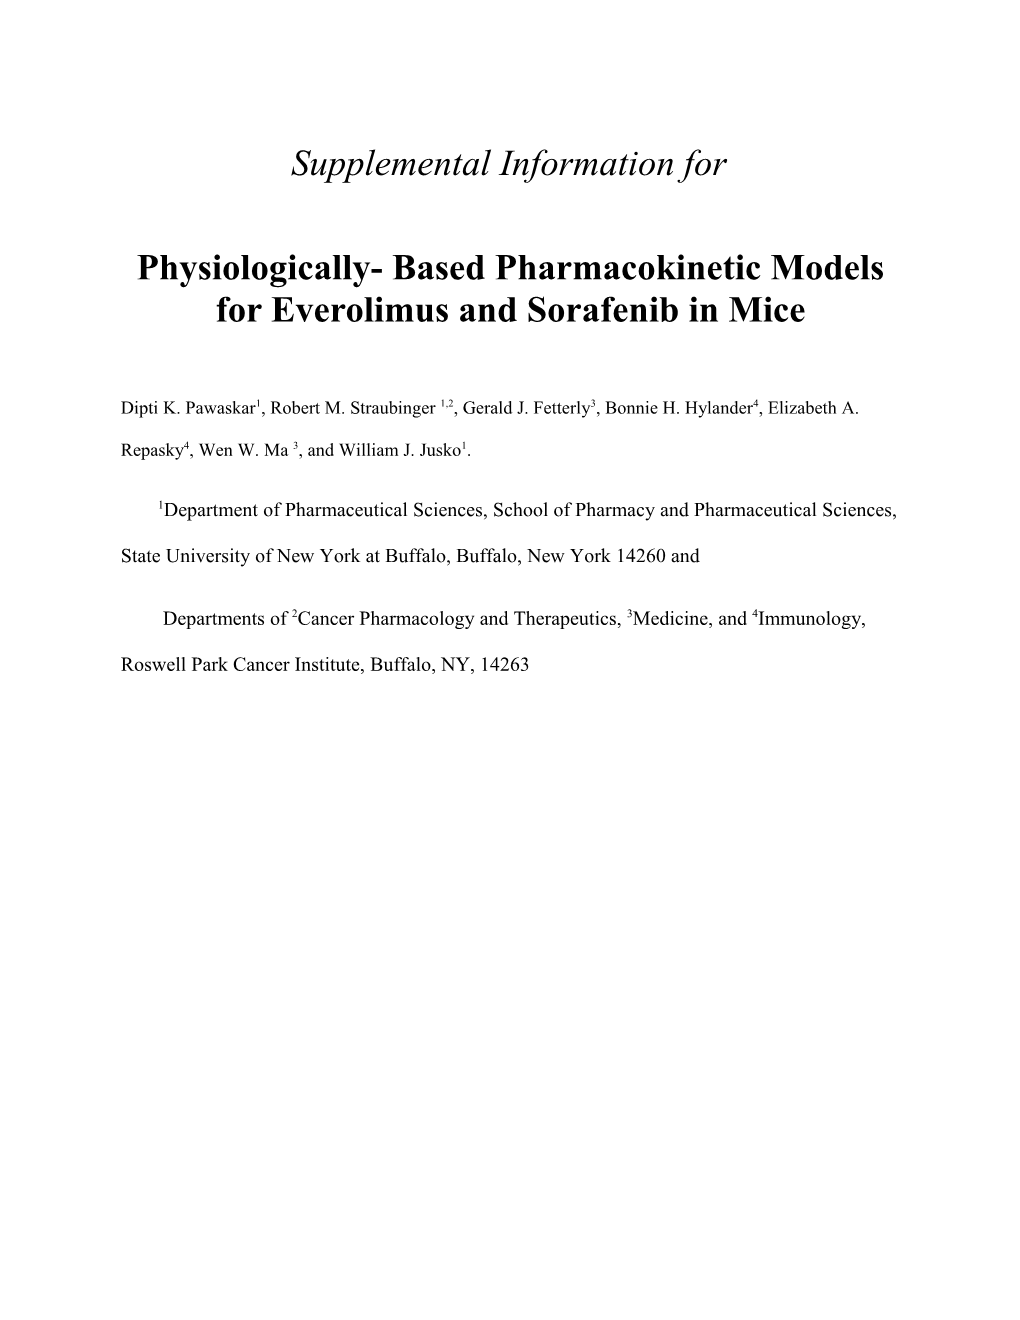 Physiologically- Based Pharmacokinetic Models for Everolimus and Sorafenib in Mice